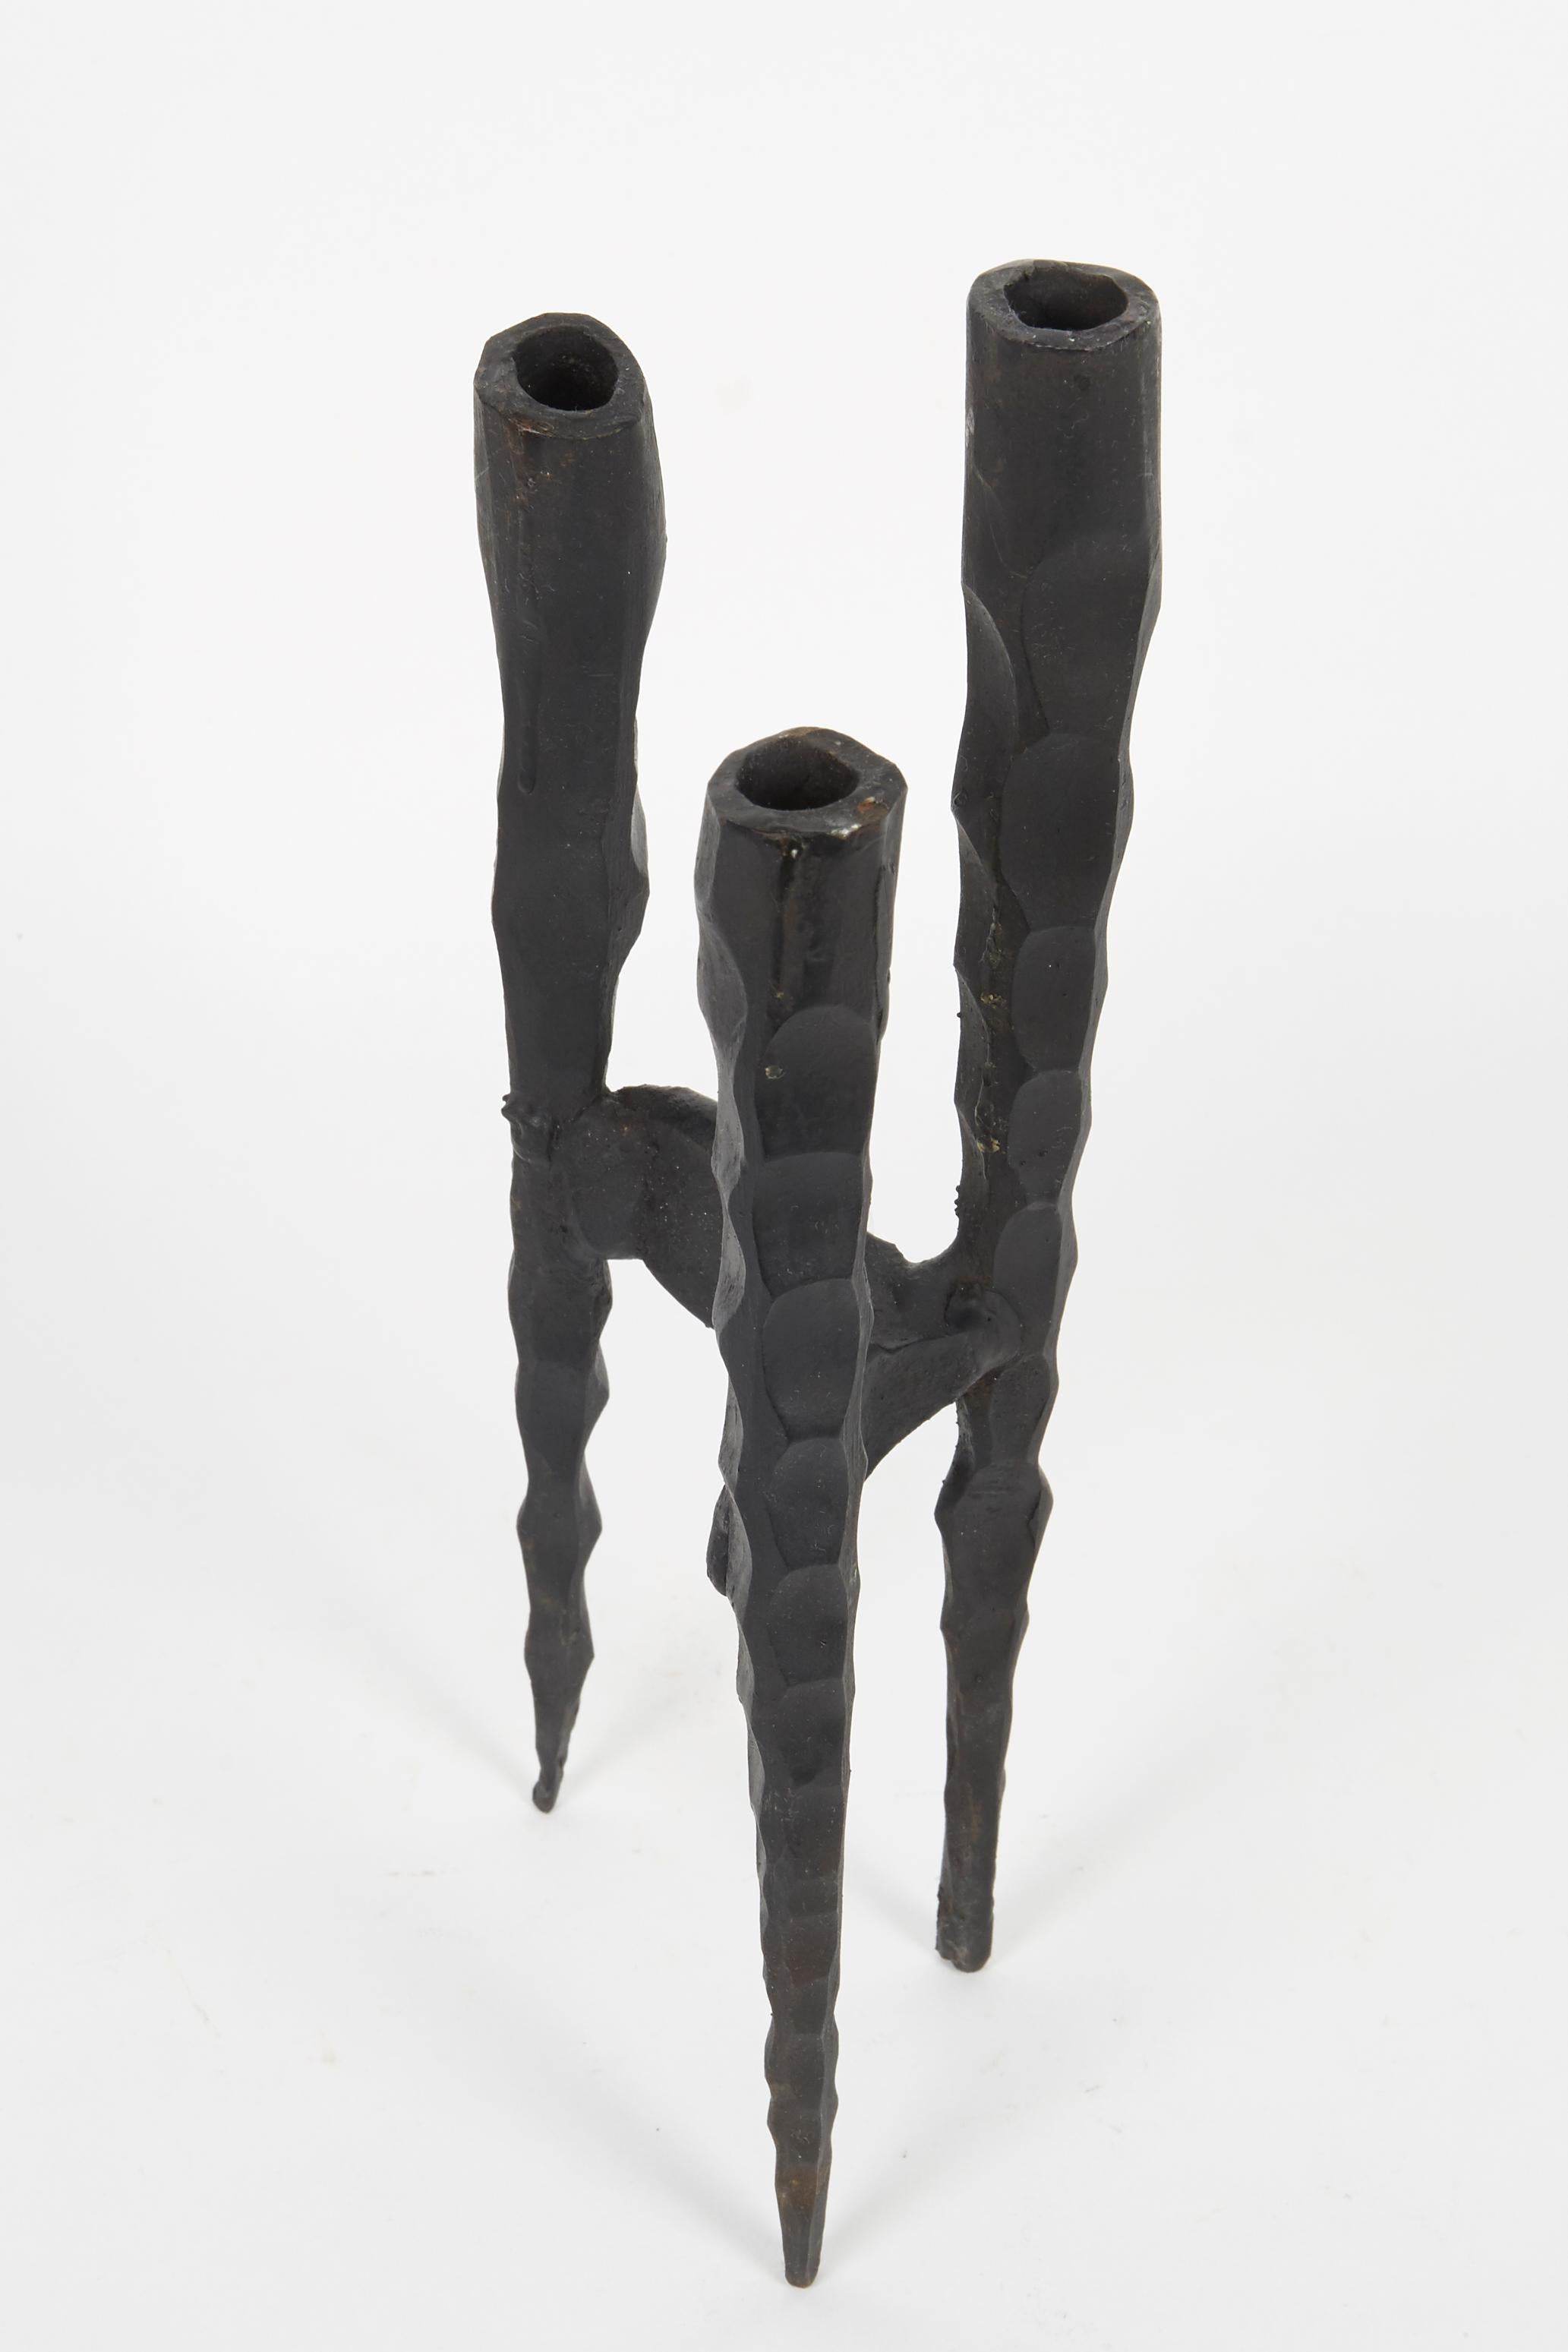 Small iron Shabbat candle holder crafted in brutalist style by David Palombo. Made for three candles, the holders come together in their middle, forming a cohesive, conic form. 

David Palombo (1920-1966) was a sculptor and painter born in Turkey